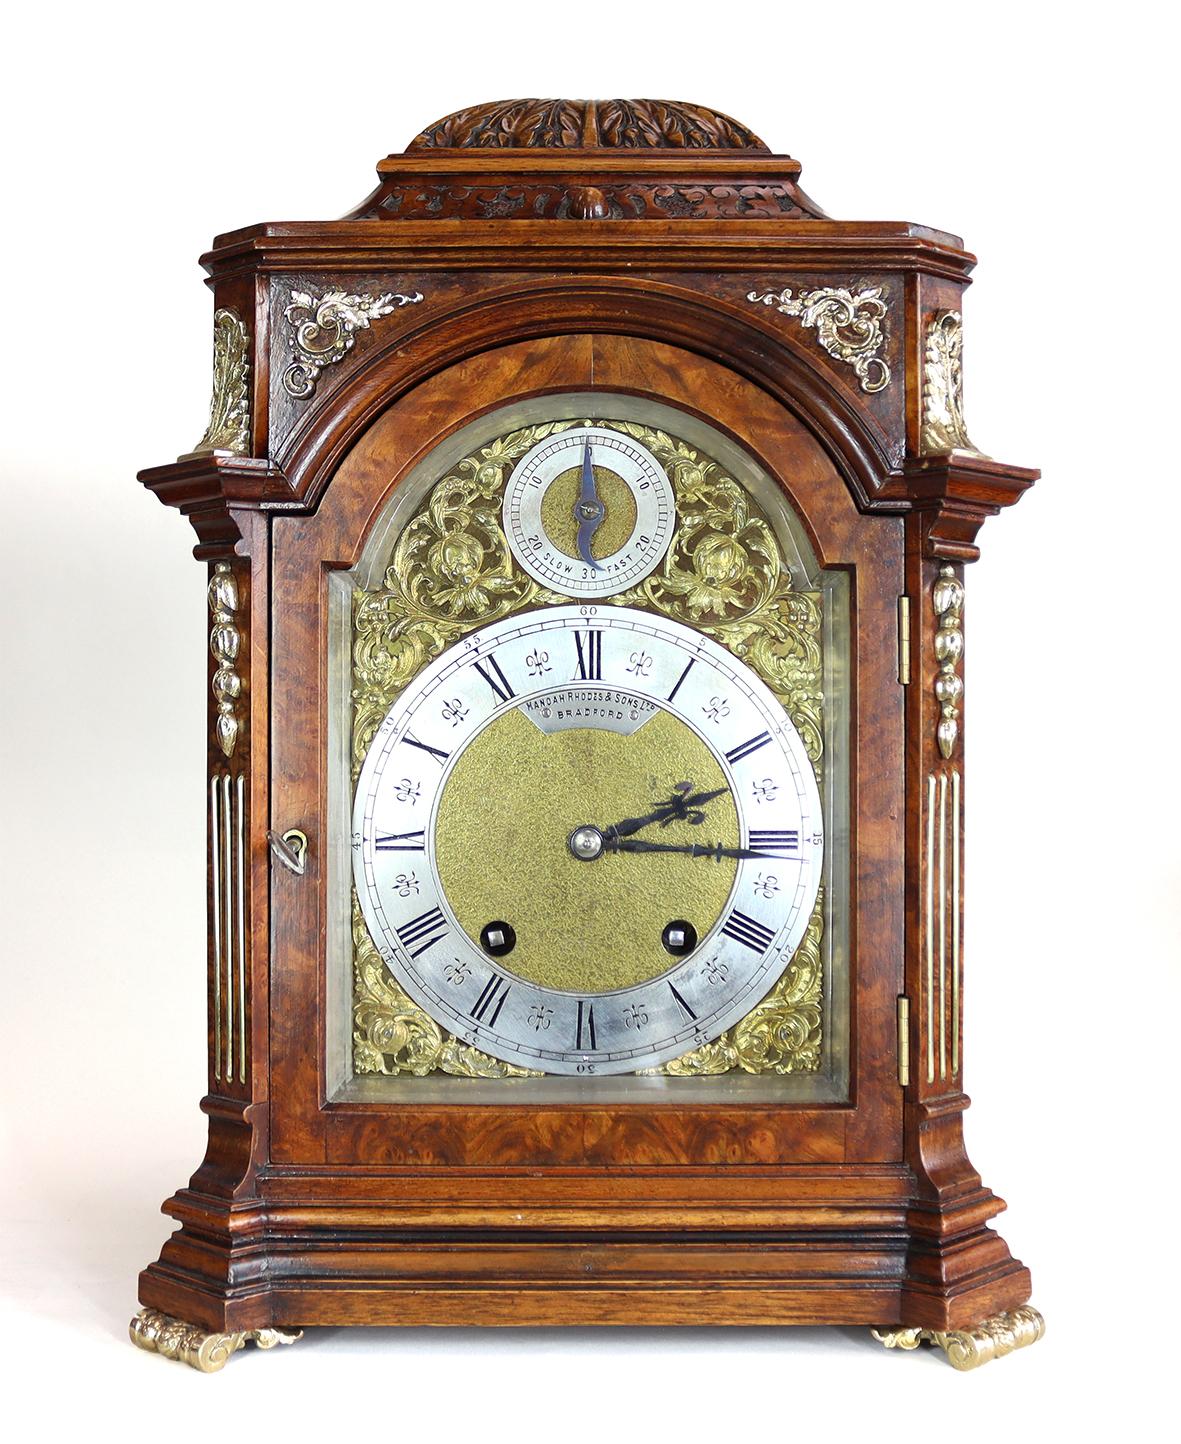 A quarter striking bracket clock in a fine figured burr walnut case with ormolu mounts and sound frets backed in sage green silk. A gilded dial with silvered chapter ring, roman numerals and gothic steel hands. 

With rise fall regulation at the top